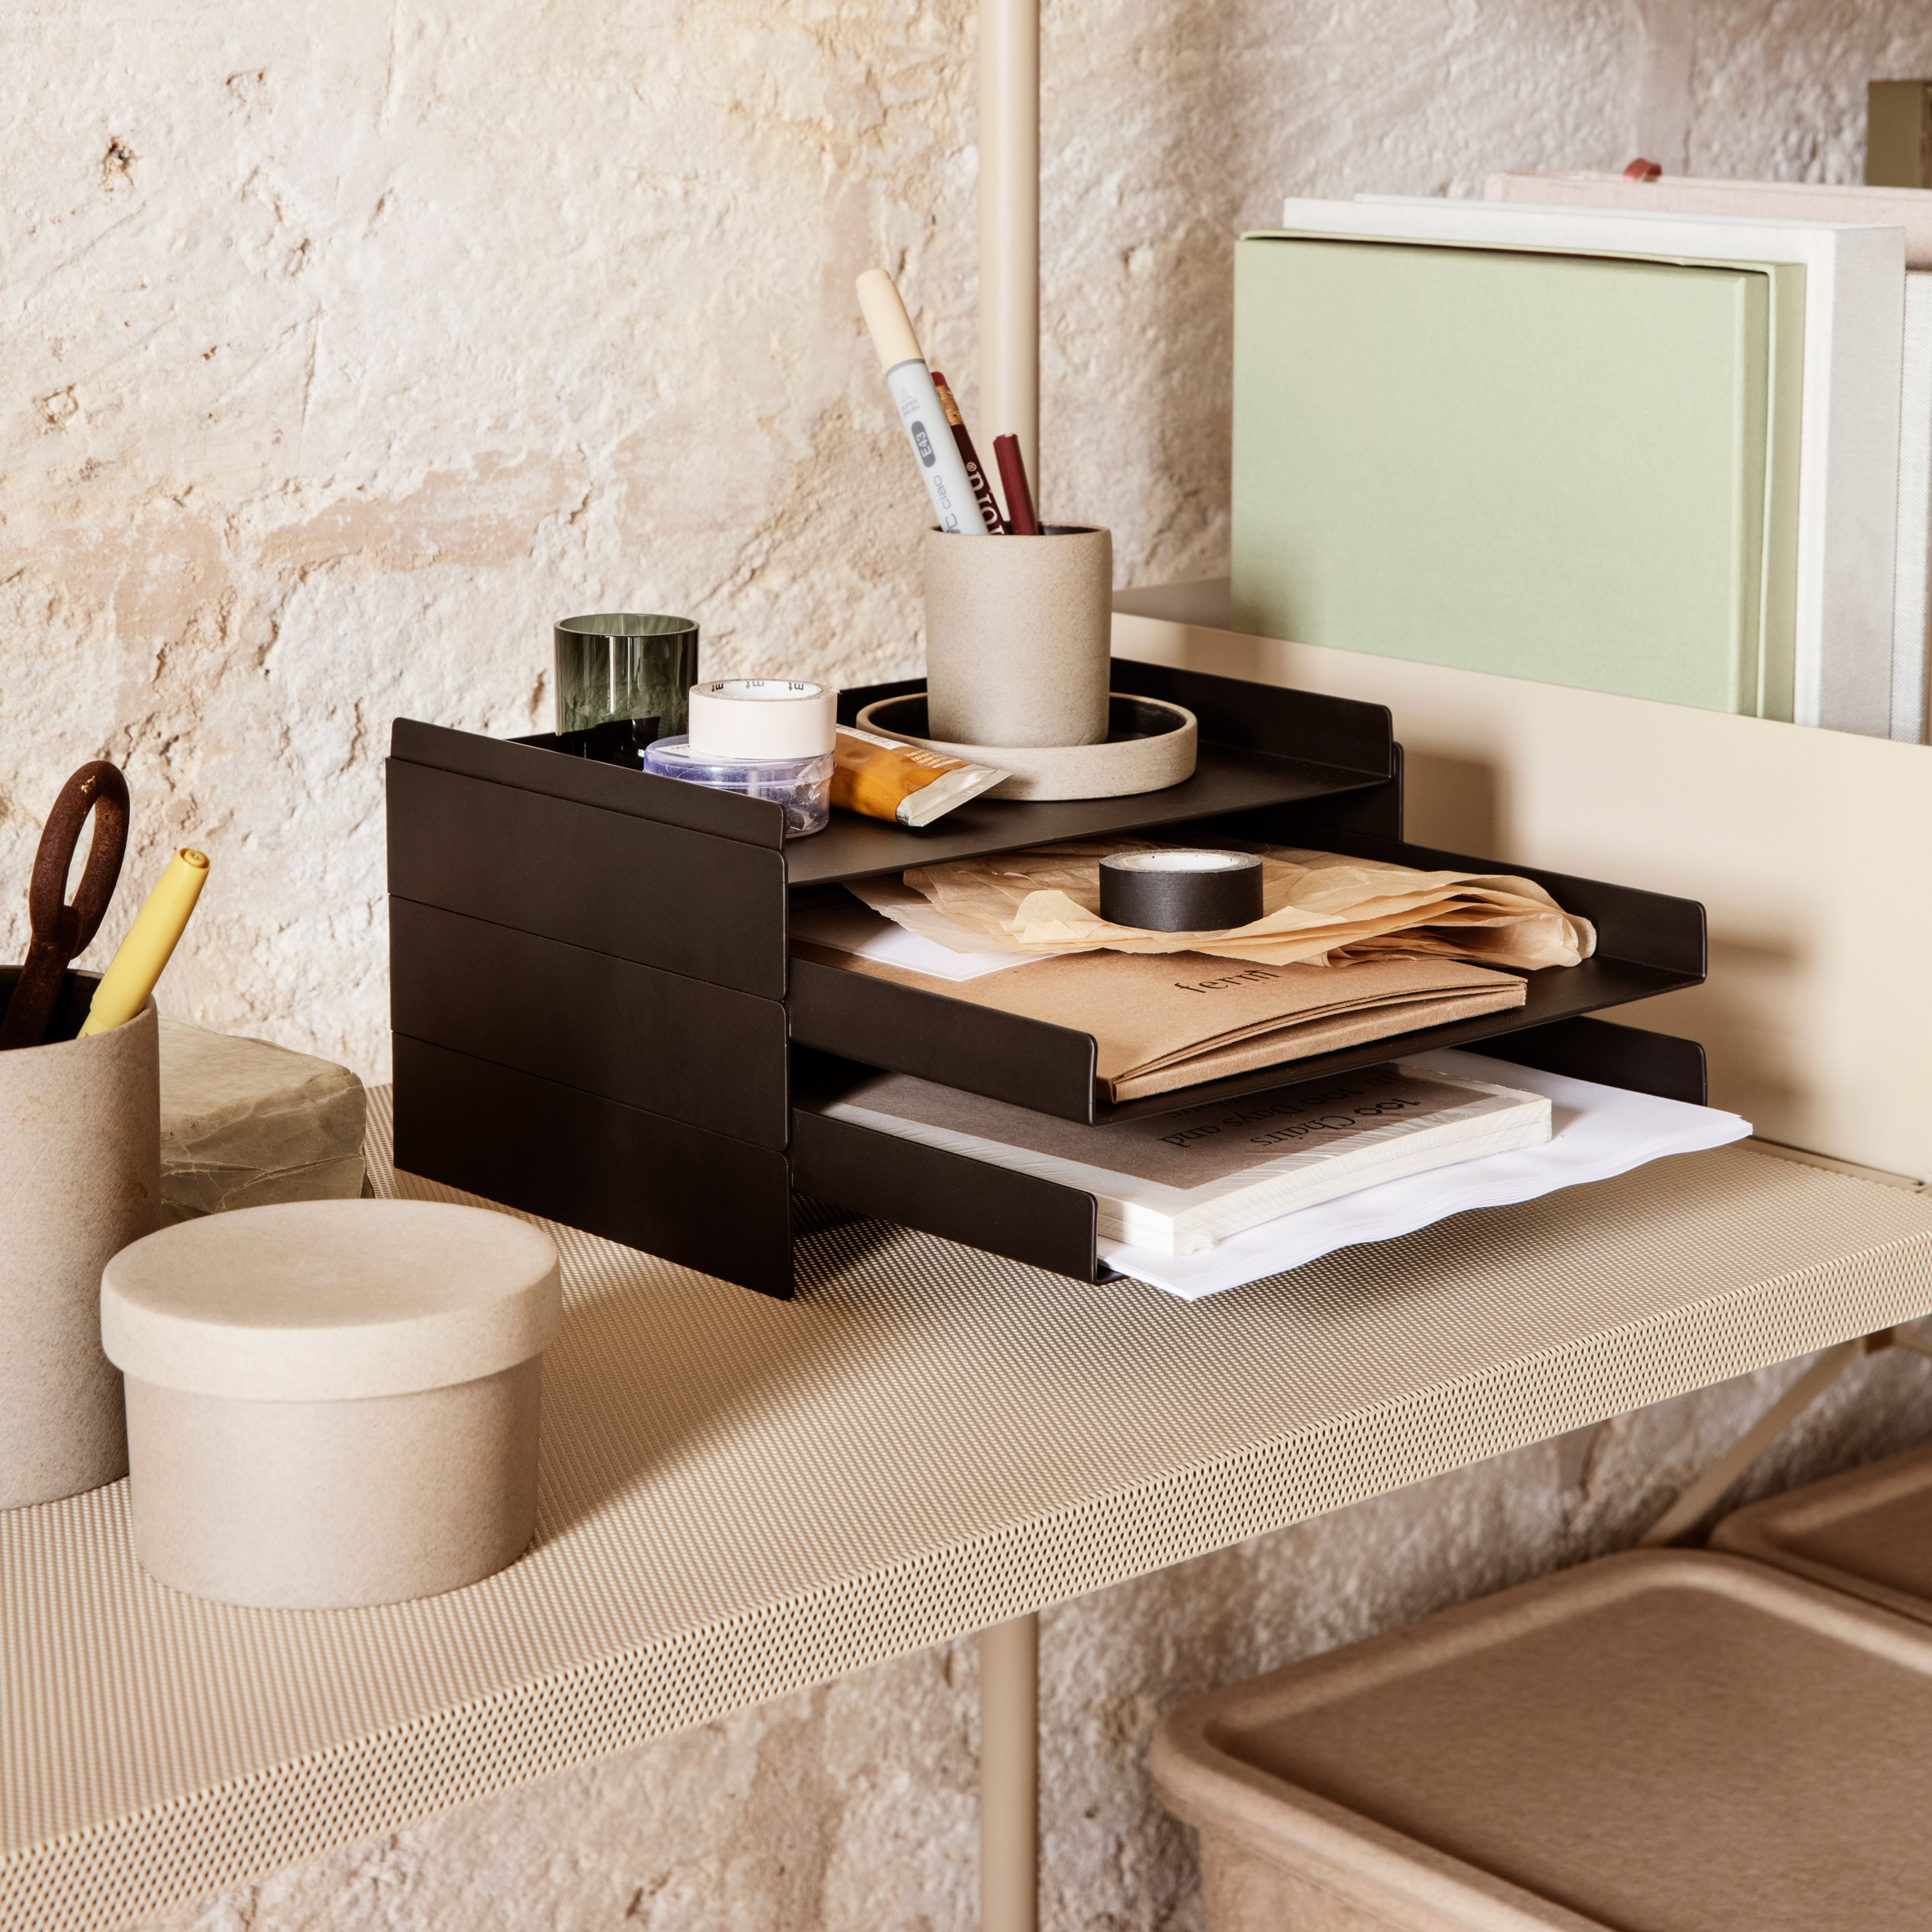 2x2 Organiser by Jamie Wolfond for Ferm Living